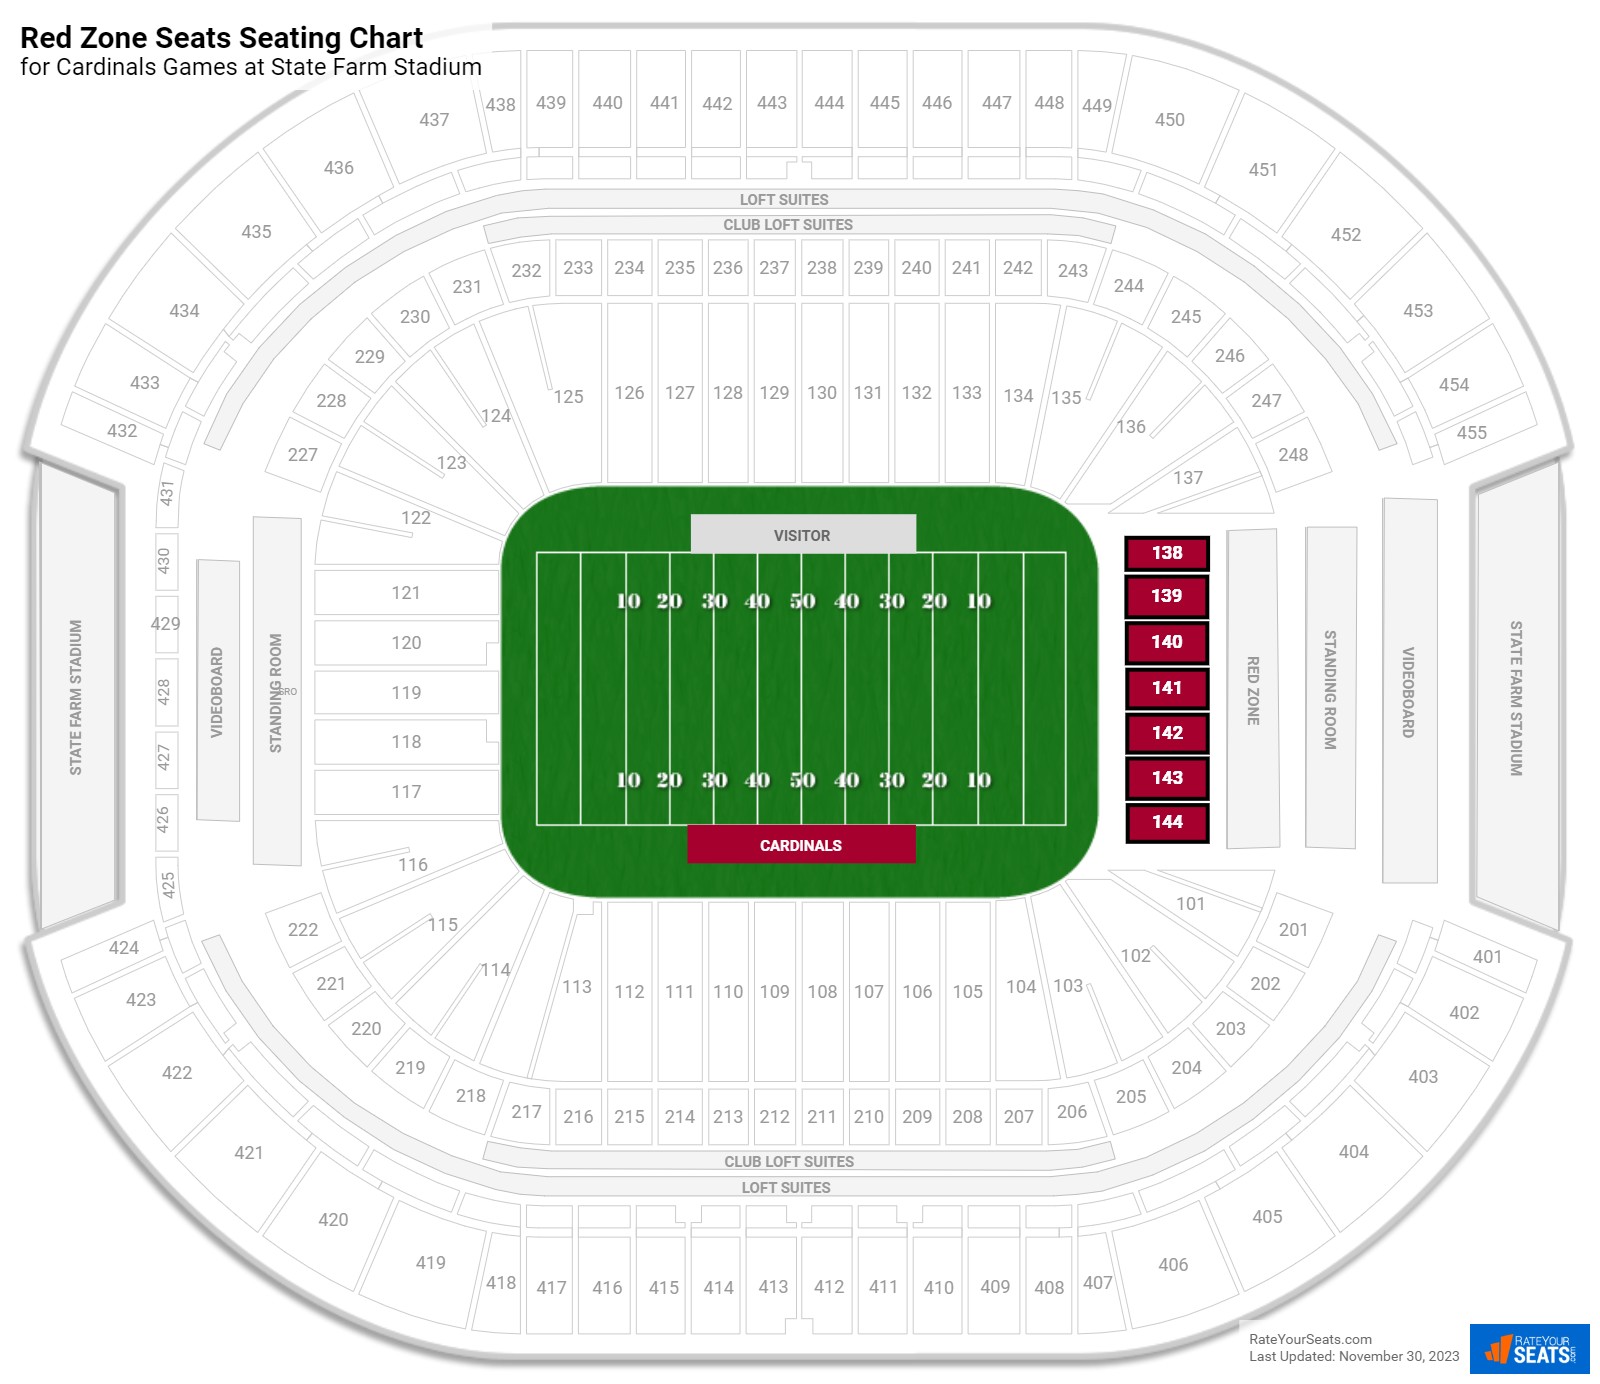 Cardinals Red Zone Seats Seating Chart at State Farm Stadium